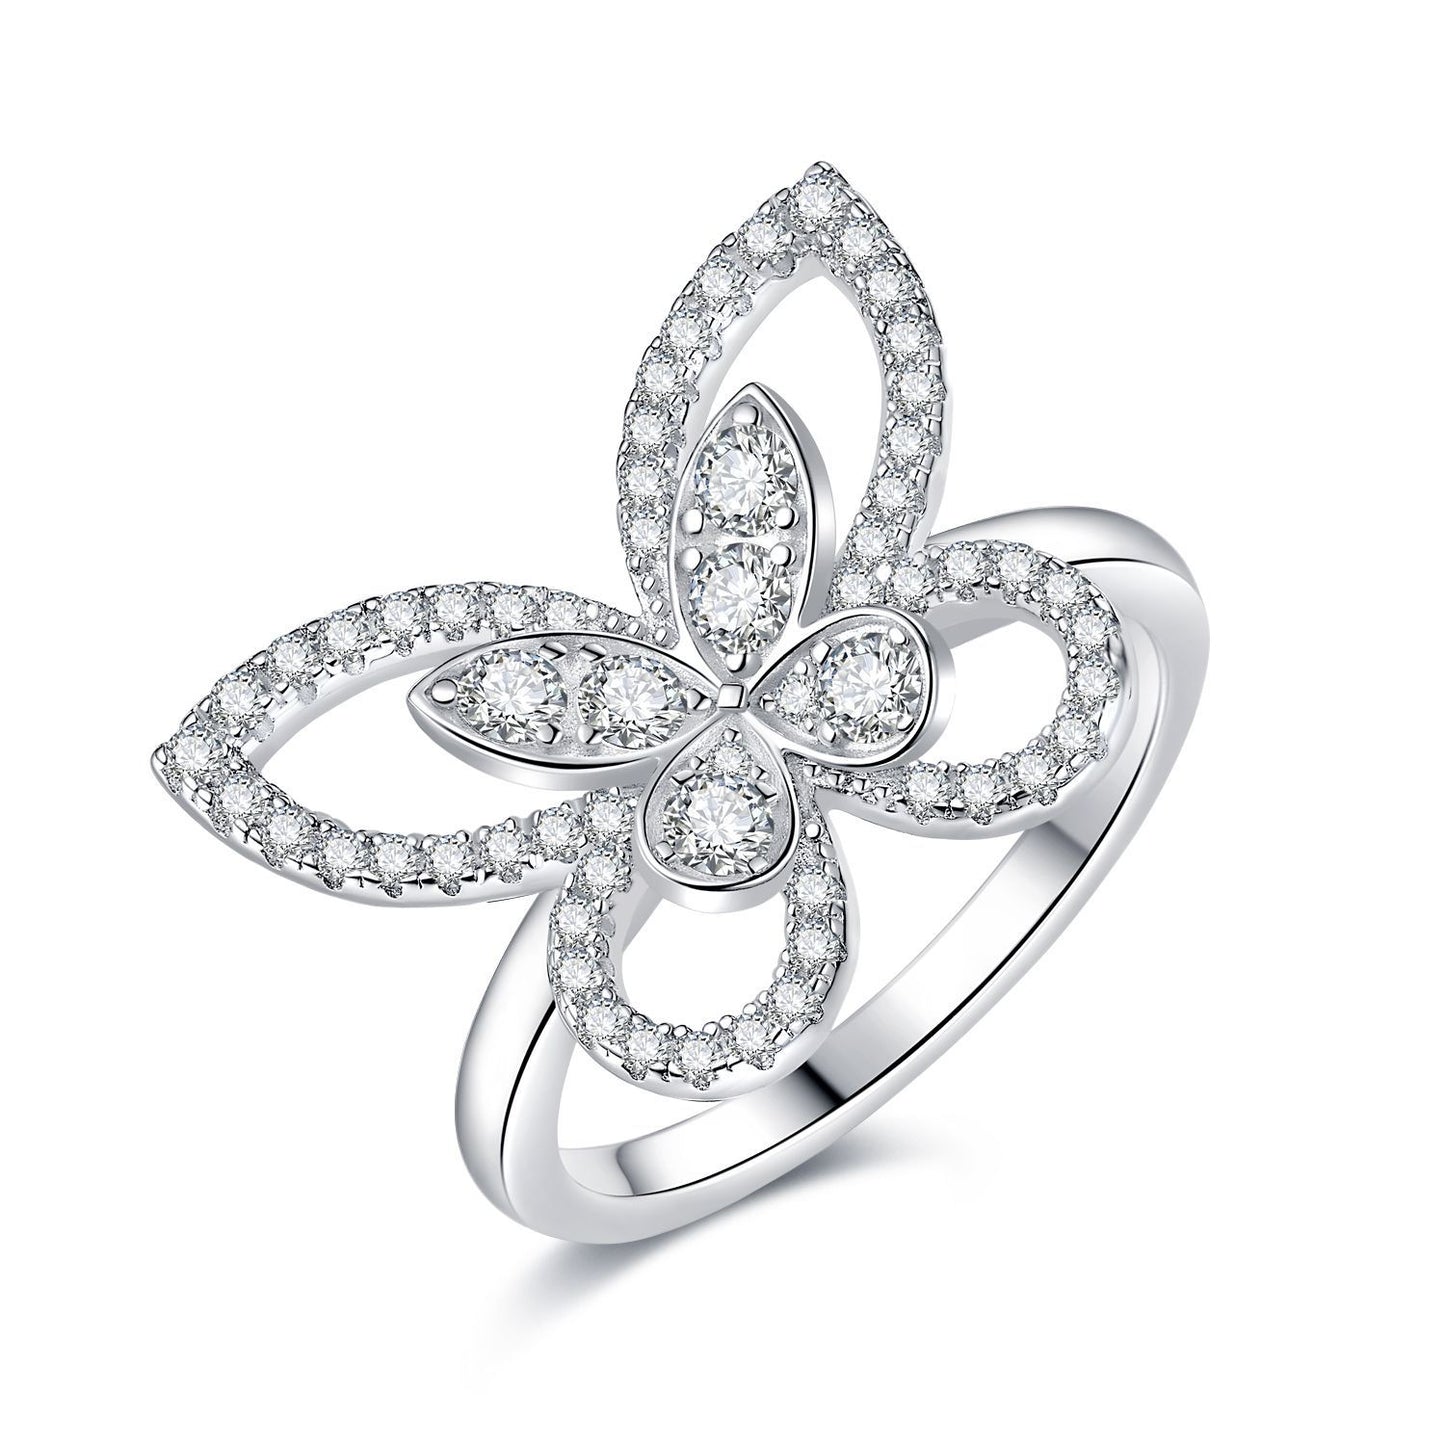 S925 Sterling Silver Moissanite Ring Women's Vintage Full Diamond Butterfly Fashion Personality Super Fairy Ring Gift